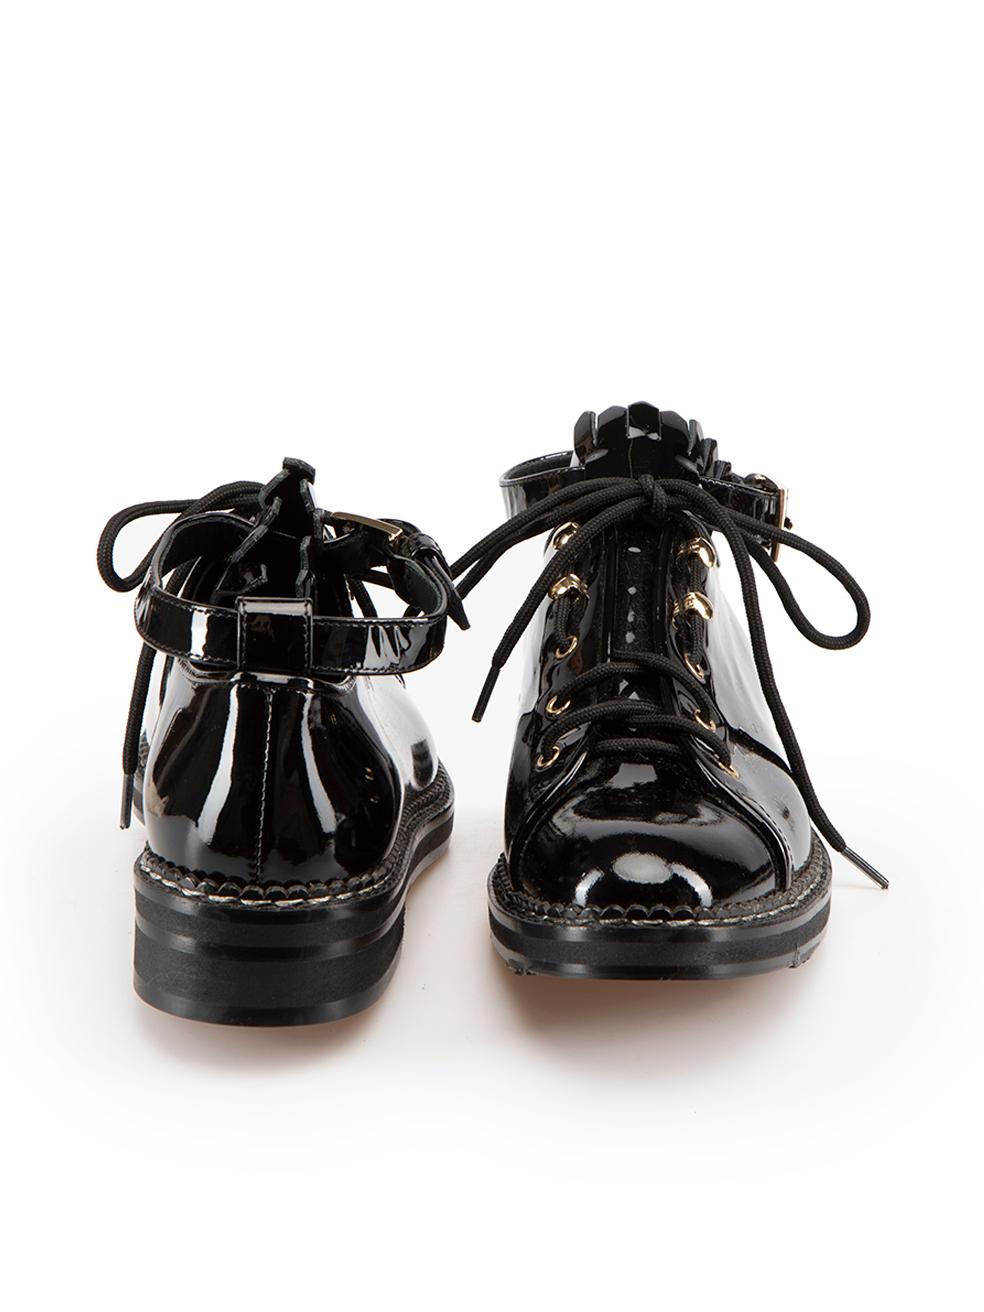 Max Mara Black Patent Leather Ankle Strap Brogues Size IT 36 In New Condition For Sale In London, GB